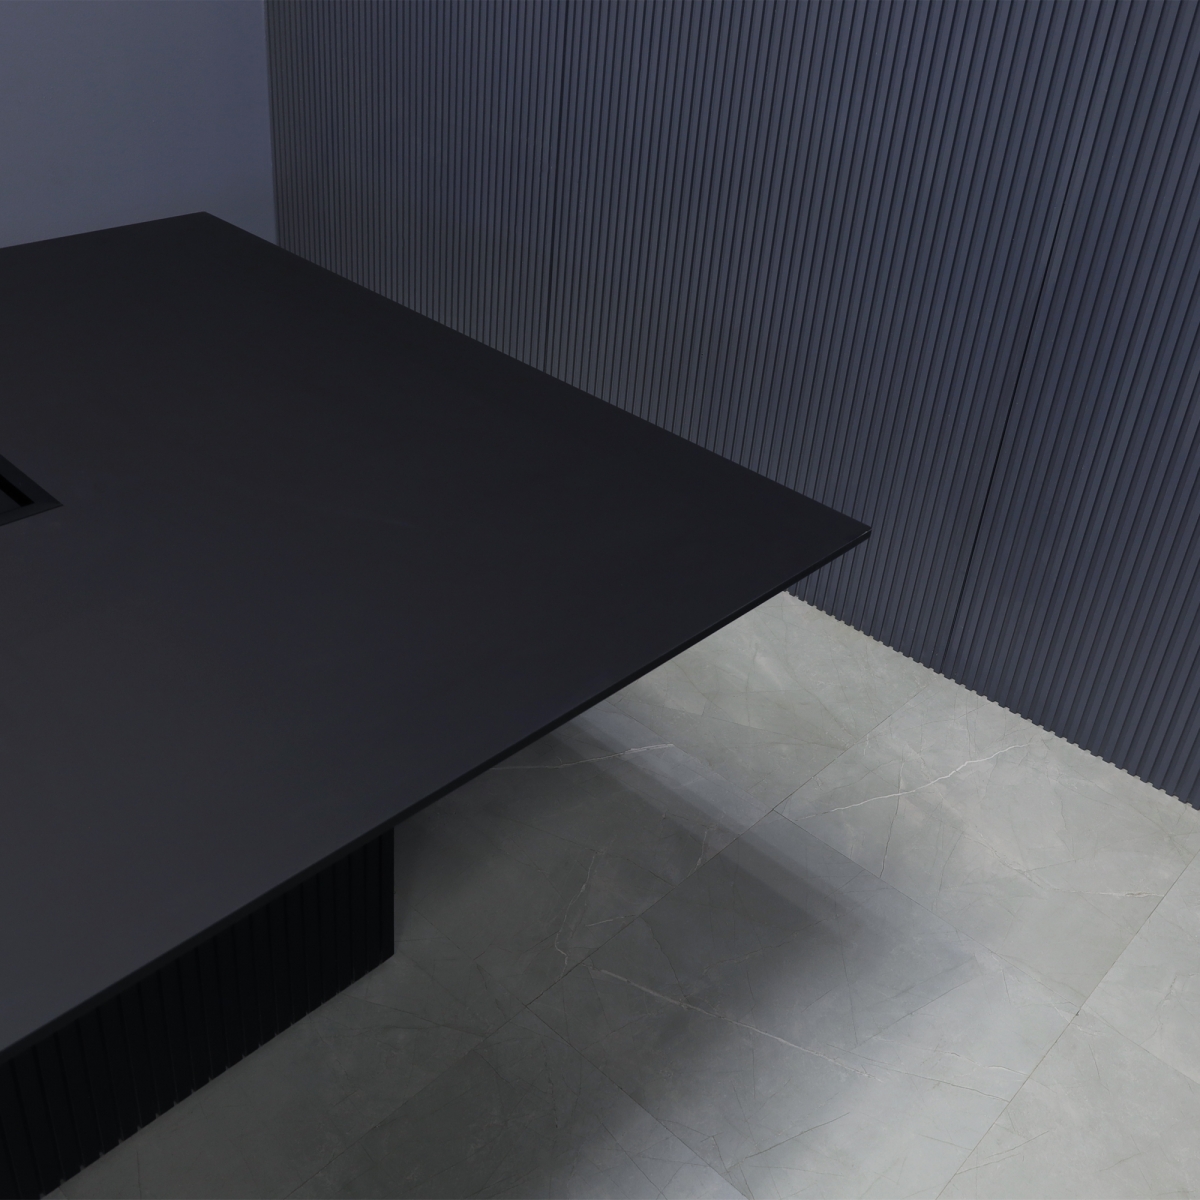 Aurora Square Shape Conference Table in Black OPAK Engineered Stone Top - 60 In. - Stock #29